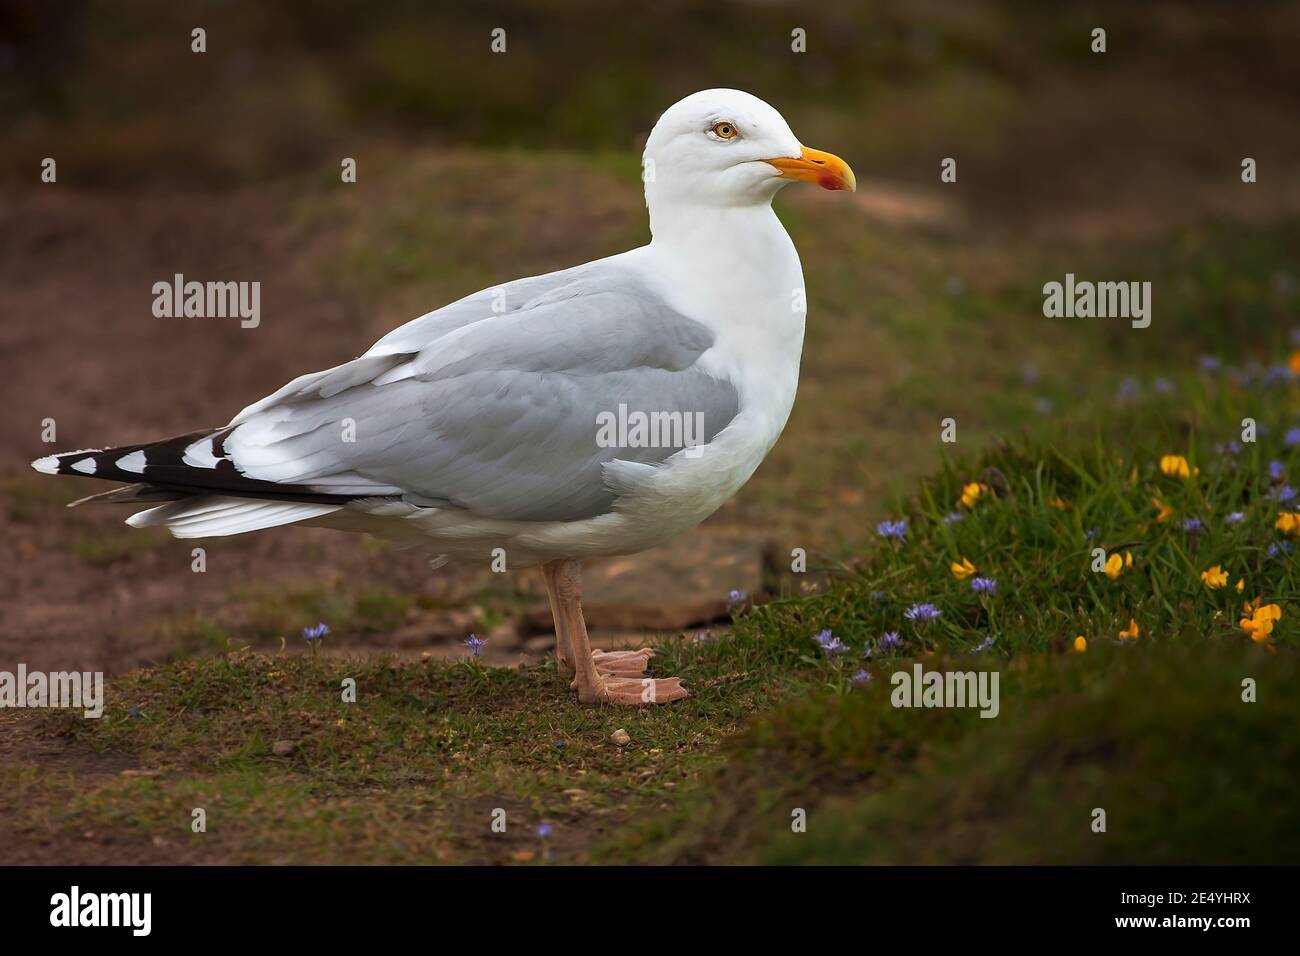 Larus marinus great black backed gull bird standing on spring meadow with blue and yellow flowers Stock Photo